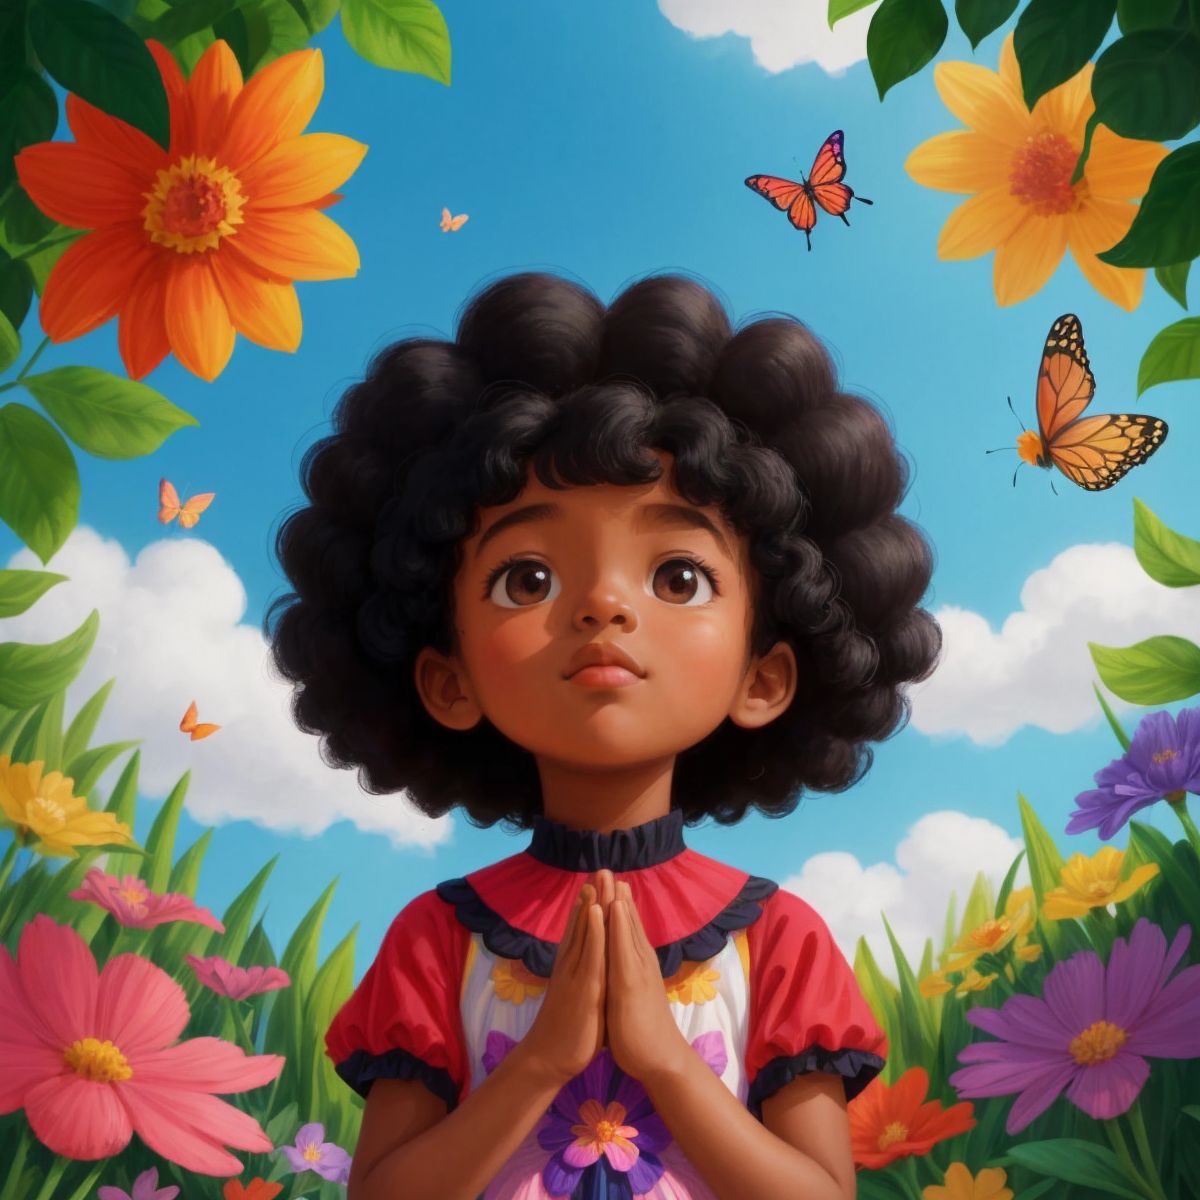 Zariah in a vibrant garden full of flowers and butterflies, hands raised in prayer, looking up to the sky with a look of wonder.